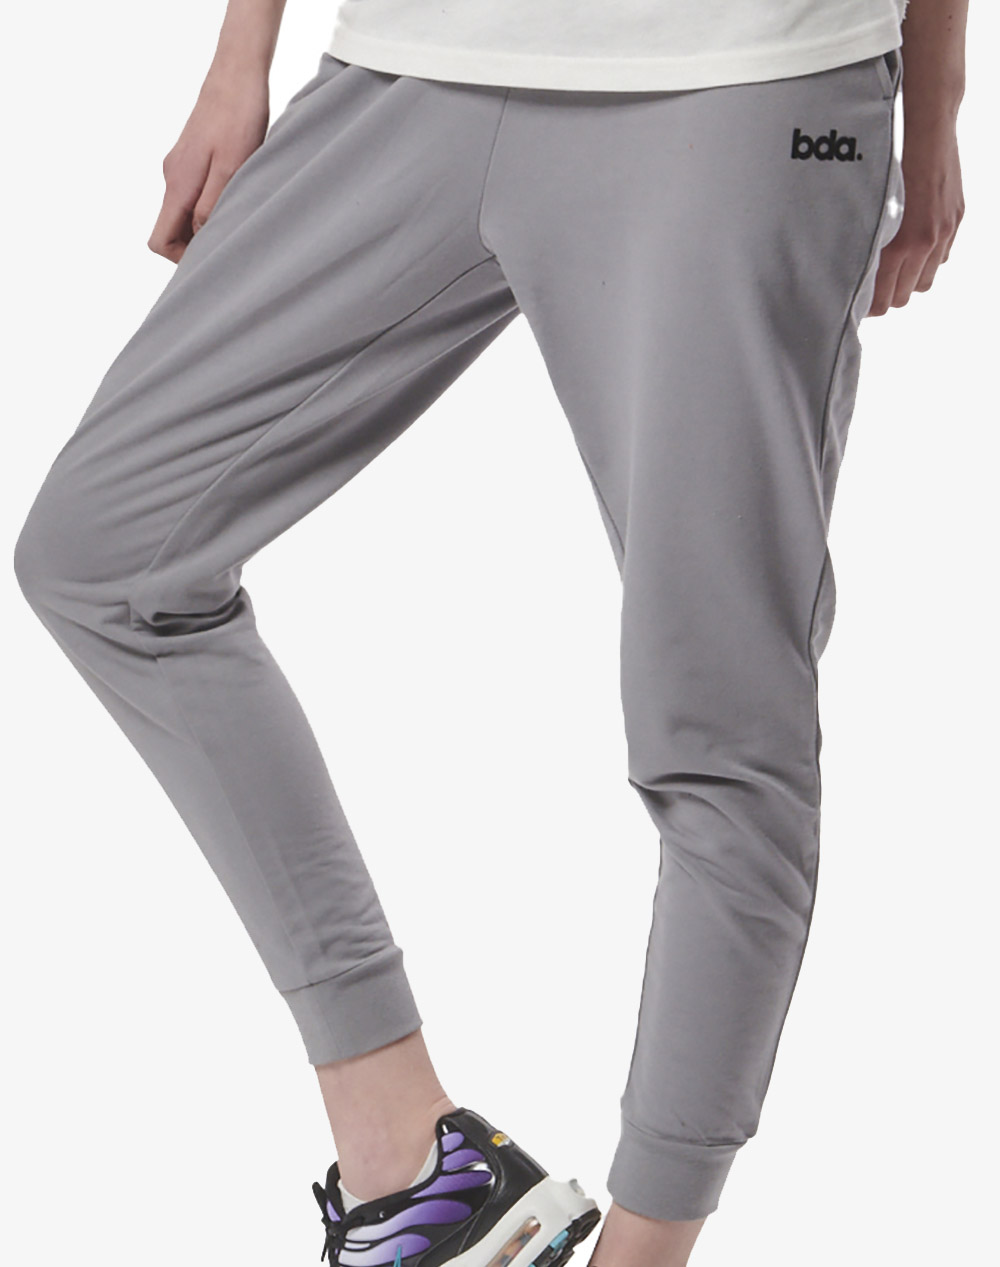 BODY ACTION WOMEN”S ESSENTIAL SPORT JOGGERS 021432-01-SILVER GREY LightGray 3810PBODY2600013_XR00135